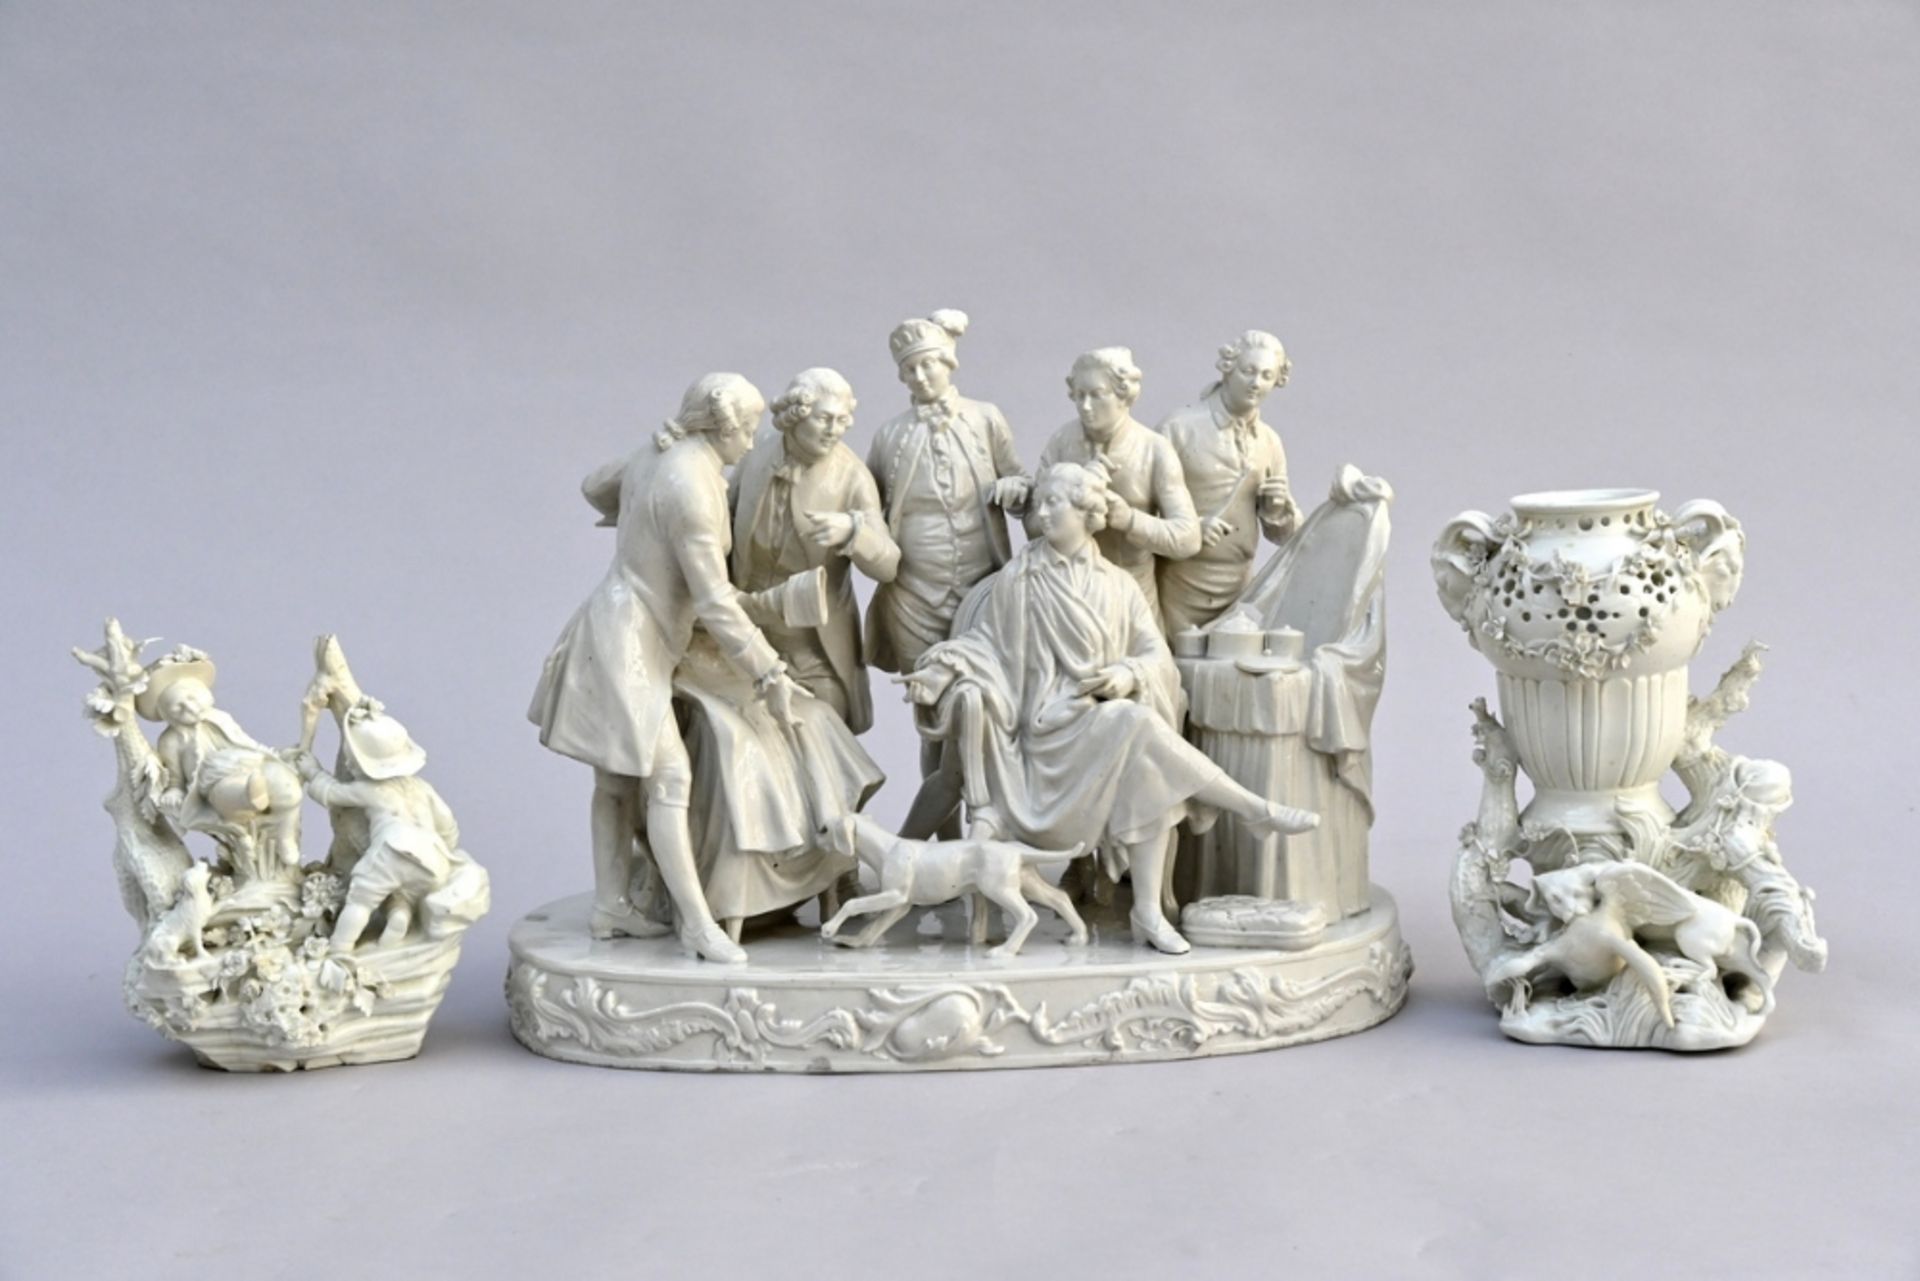 Collection of p‚te tendre: a large 19th century sculpture and two smaller 18th century pieces (